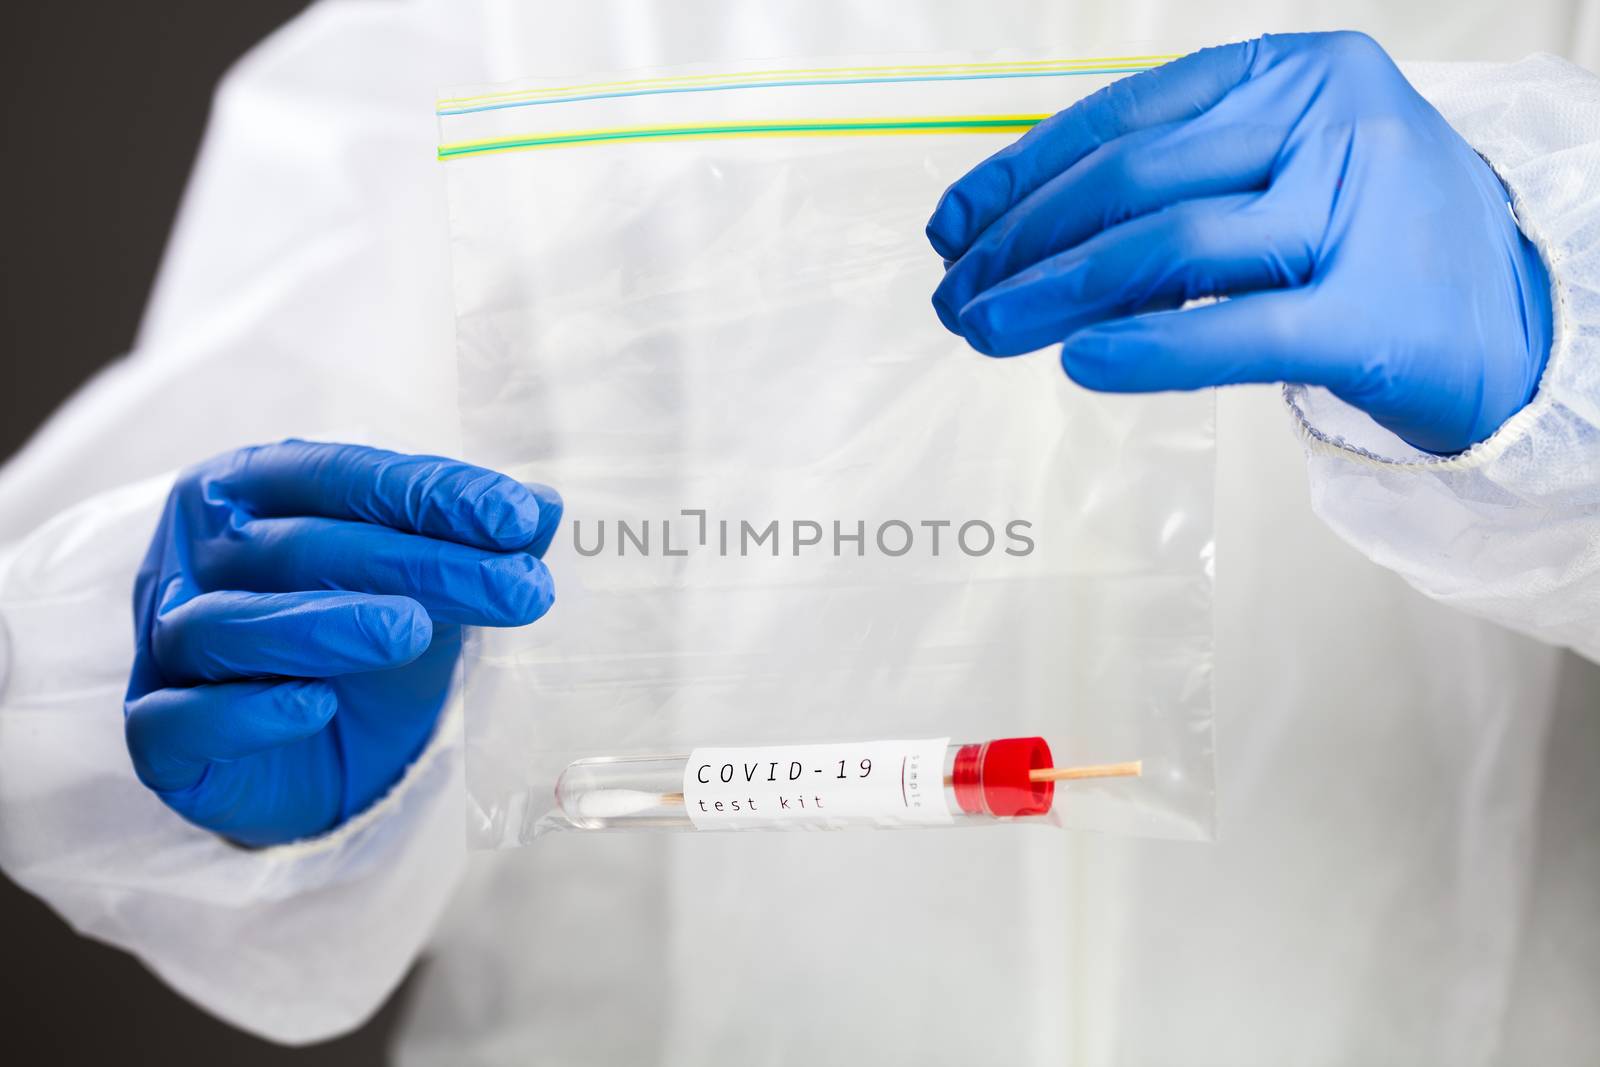 COVID-19 virus disease self swab test sample kit, medical laboratory scientist holding a plastic bag containing test tube with throat or nose swab viral specimen collection equipment, Coronavirus 